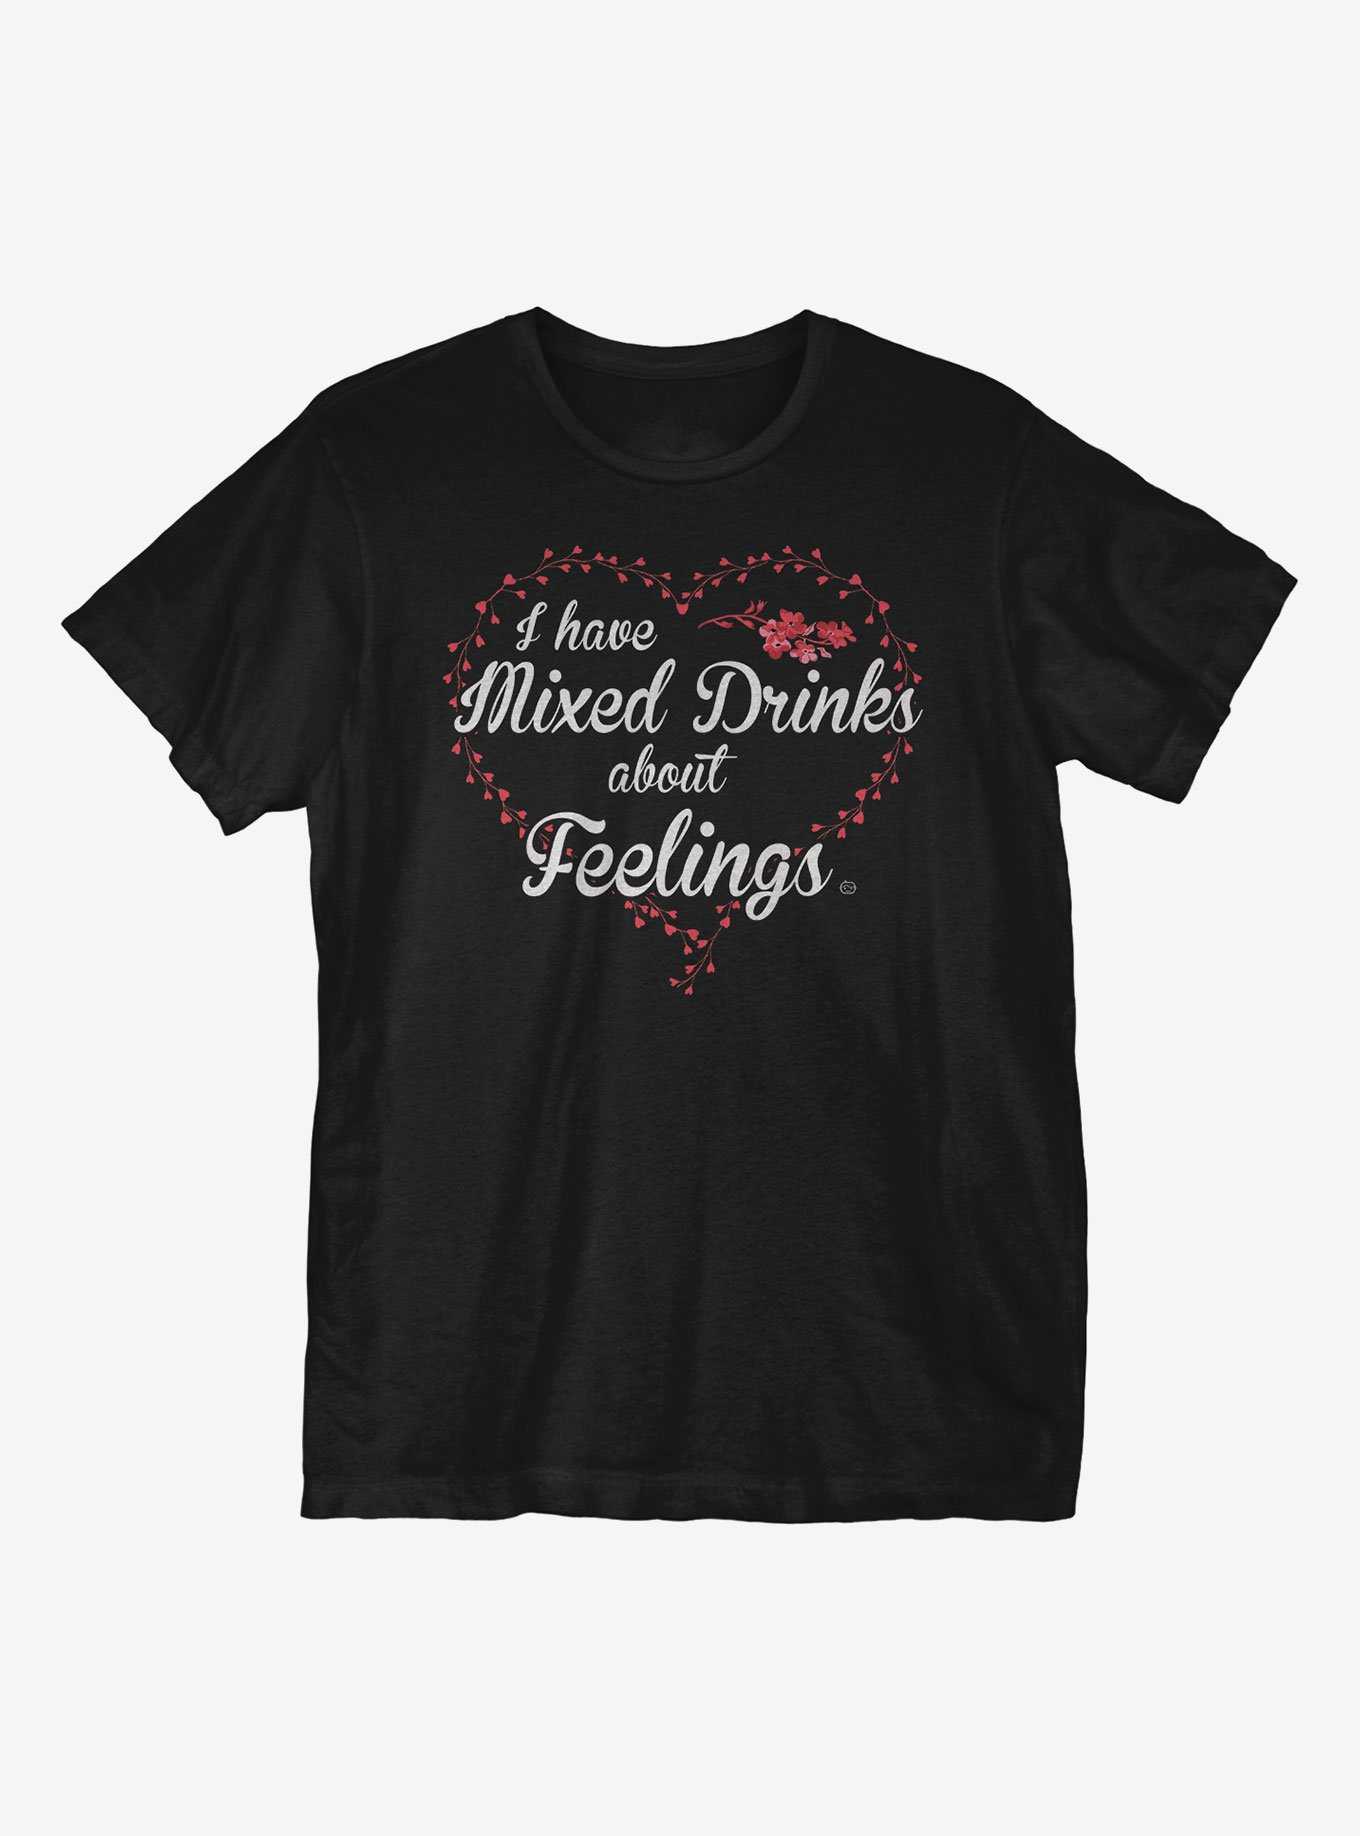 About Feelings T-Shirt, , hi-res